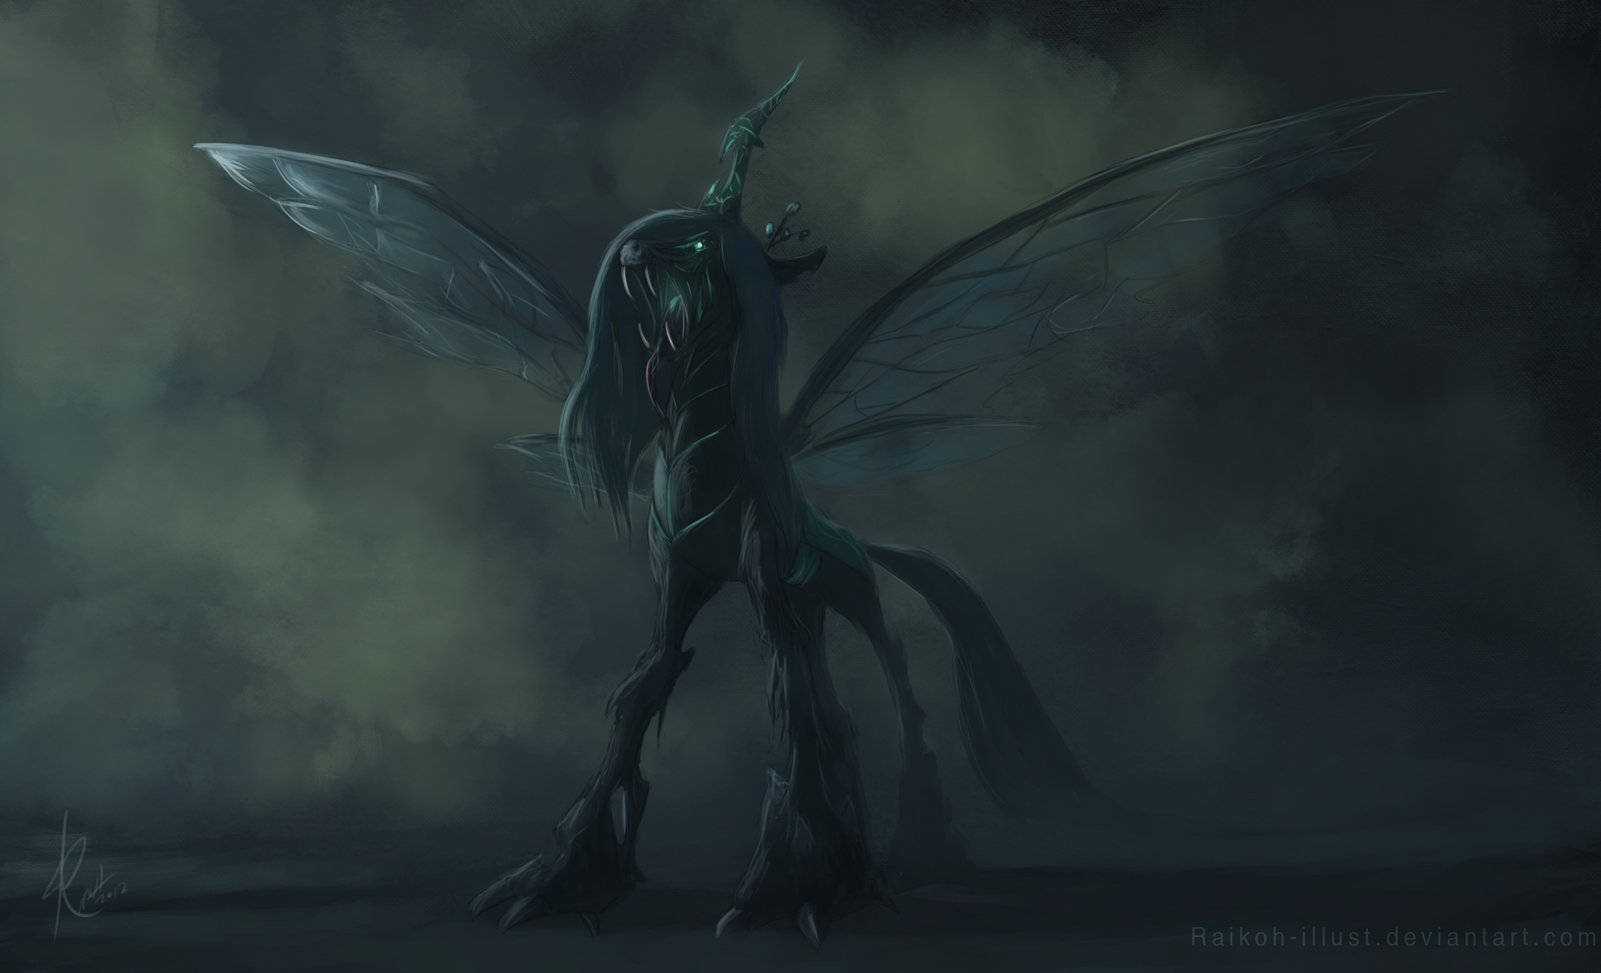 The Queen of the Changelings by Raikoh-illust